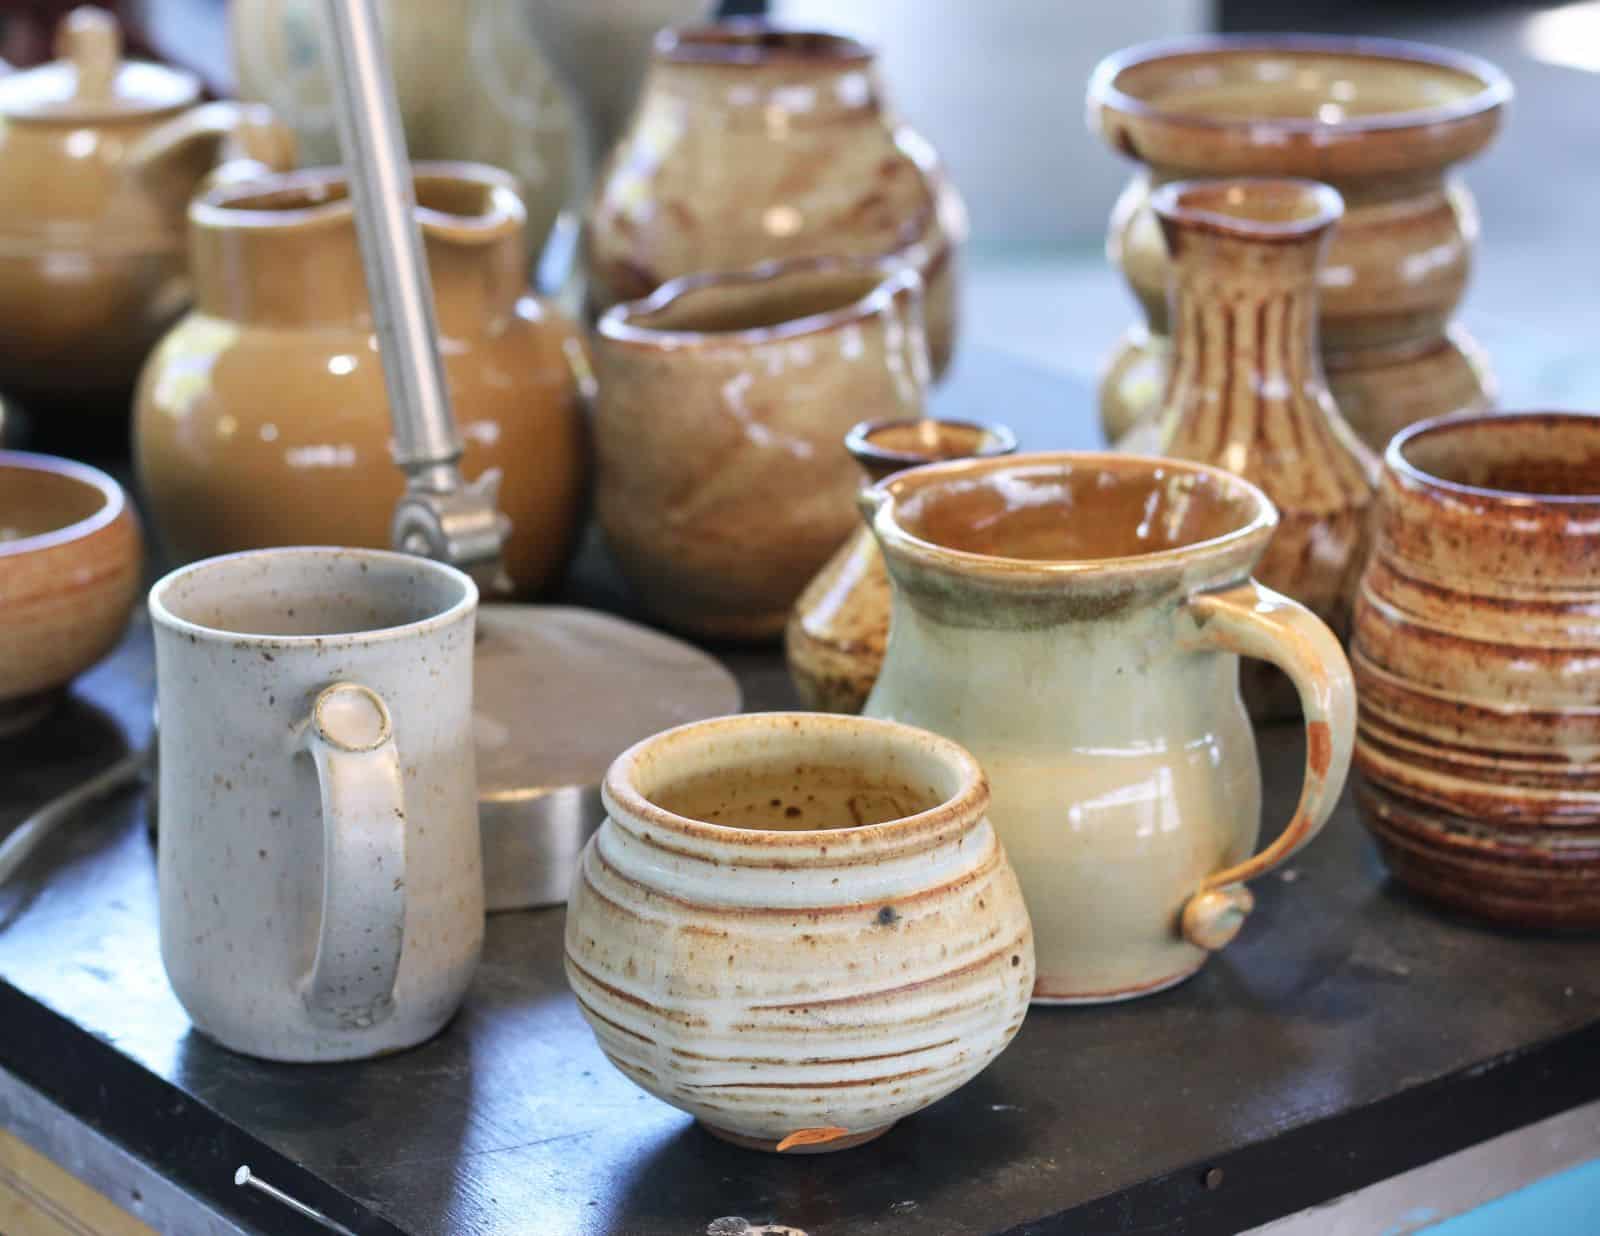 <p class="wp-caption-text">Image Credit: Shutterstock / Josiah True</p>  <p>Browse unique treasures and vintage finds at the Nashville Flea Market, held monthly at the Tennessee State Fairgrounds. With hundreds of vendors selling everything from antiques to handmade crafts, it’s a shopper’s paradise.</p>